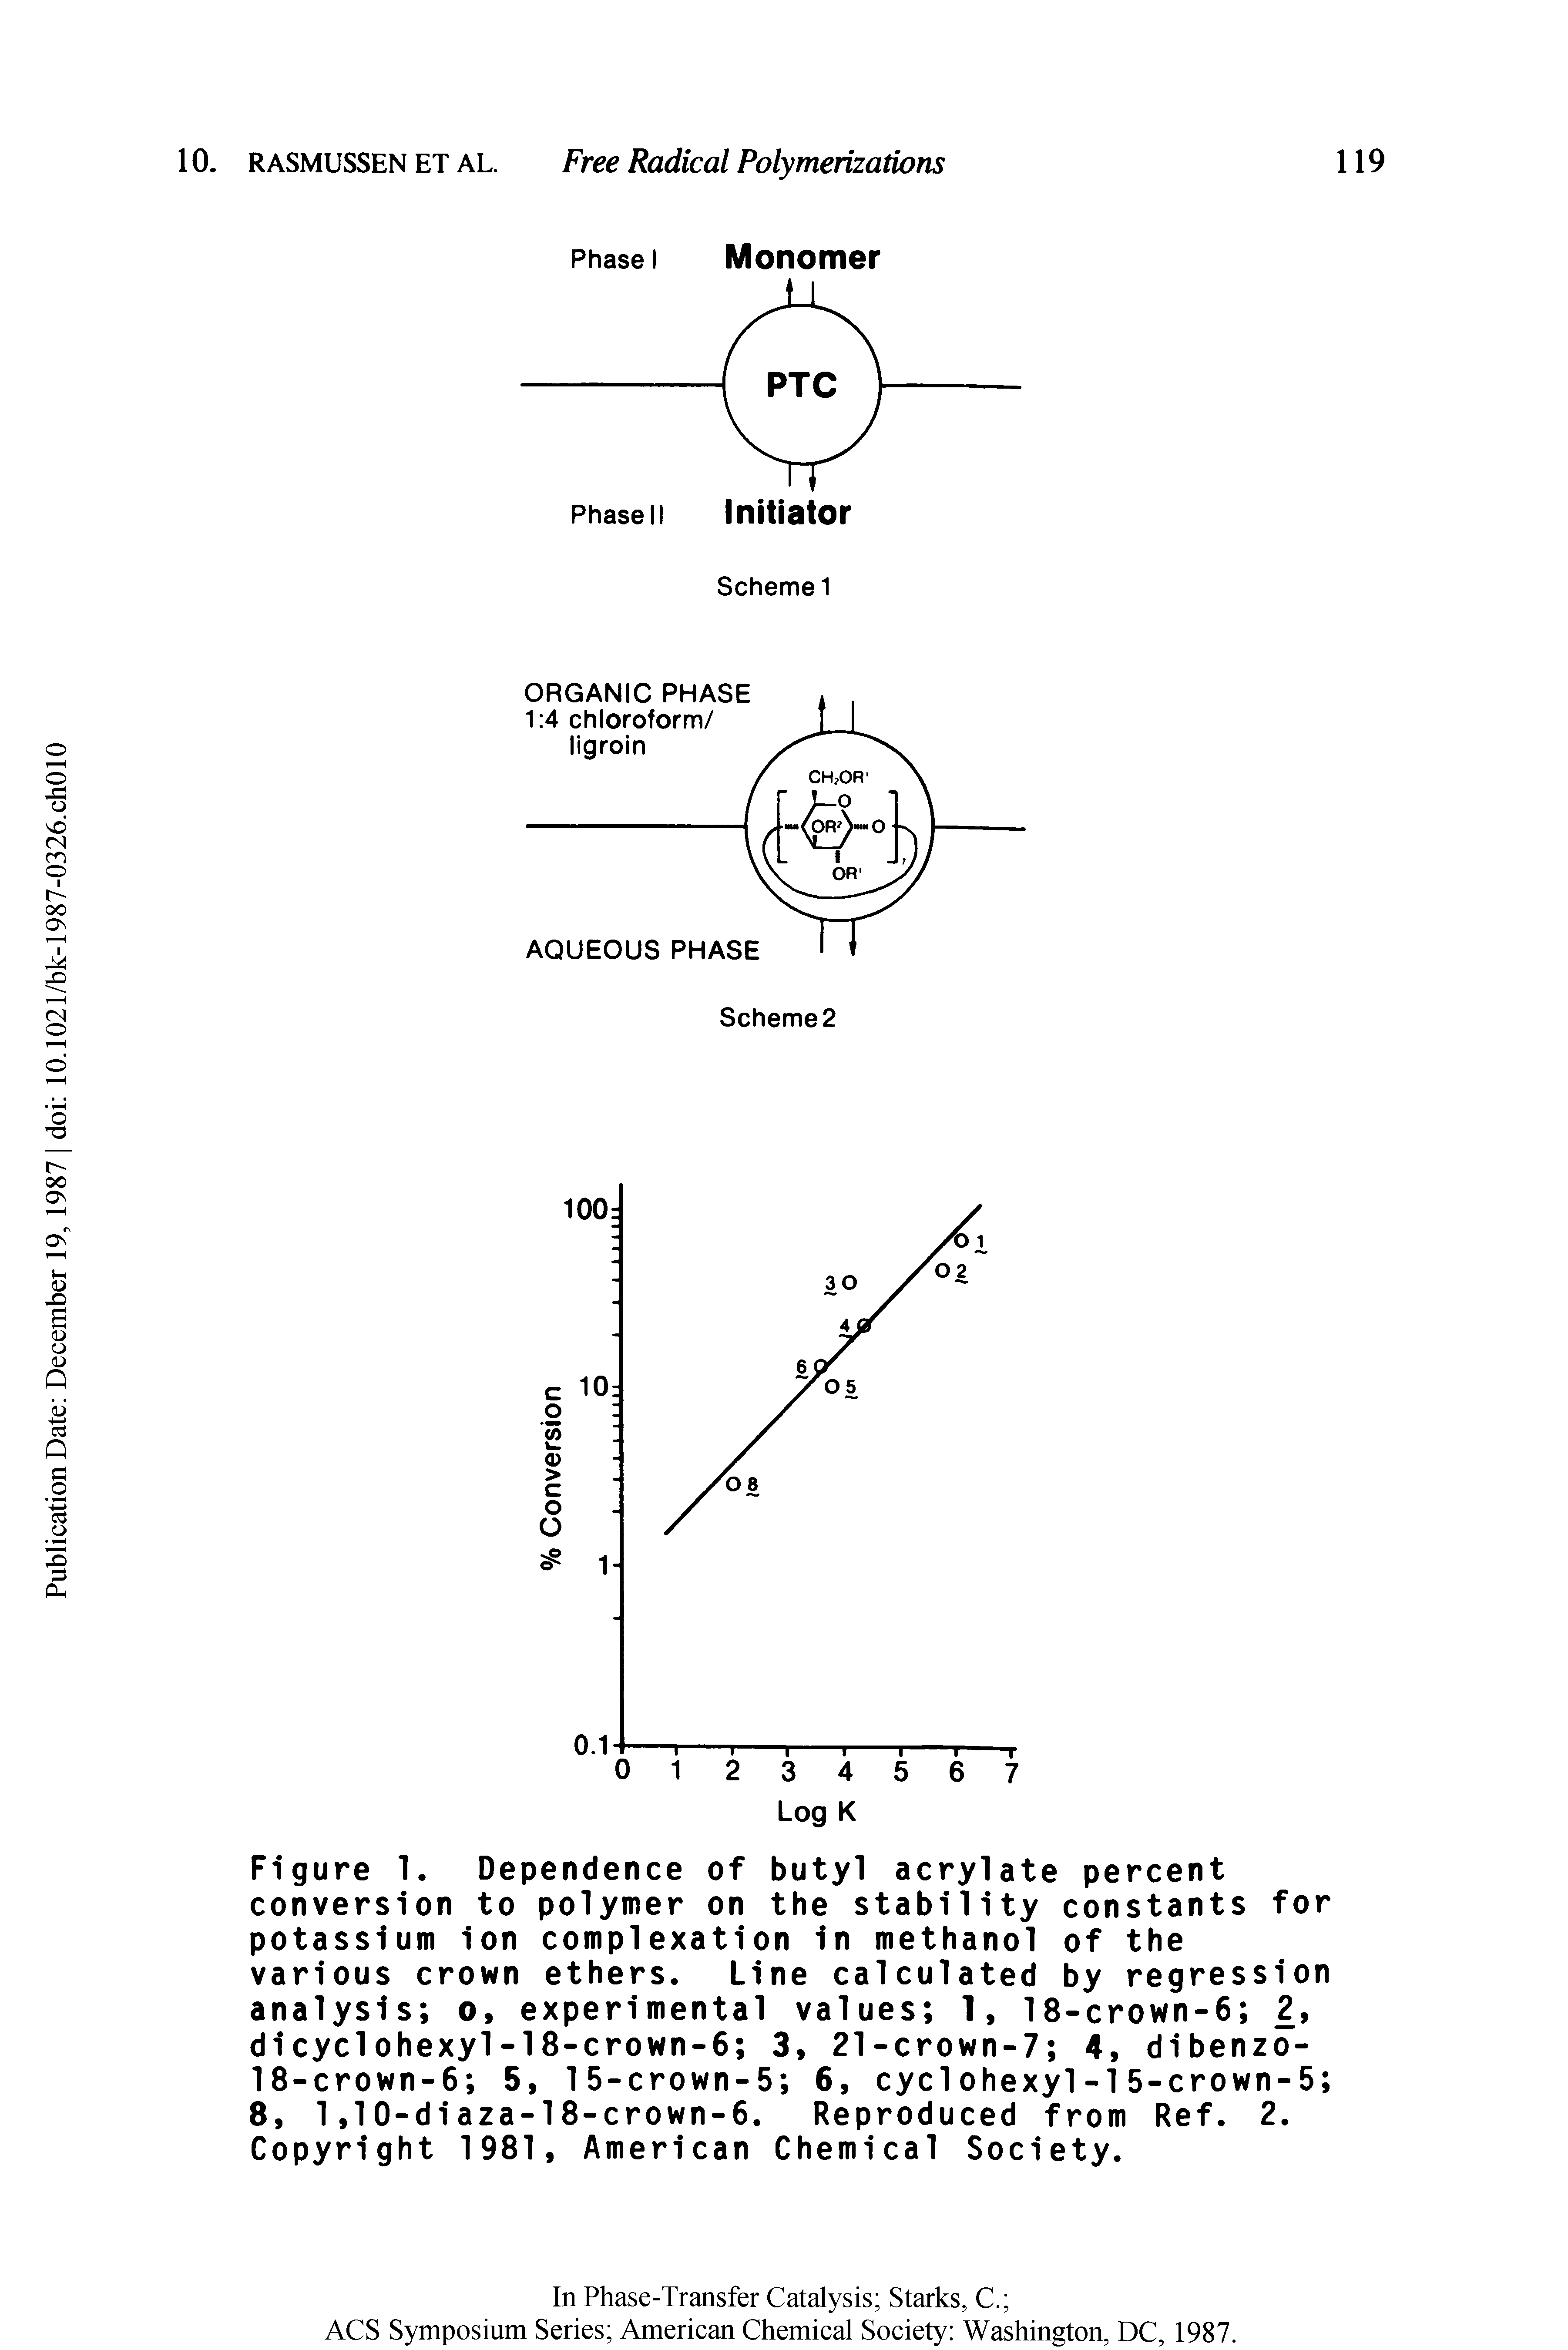 Figure 1. Dependence of butyl acrylate percent conversion to polymer on the stability constants for potassium ion complexation in methanol of the various crown ethers. Line calculated by regression analysis o, experimental values 1, 18-crown-6 2, dicyclohexyl-18-crown-6 3, 21-crown-7 4, dibenzo-18-crown-6 5, 15-crown-5 6, cyclohexyl-1 5-crown-5 8, 1,10-diaza-18-crown-6. Reproduced from Ref. 2. Copyright 1981, American Chemical Society.